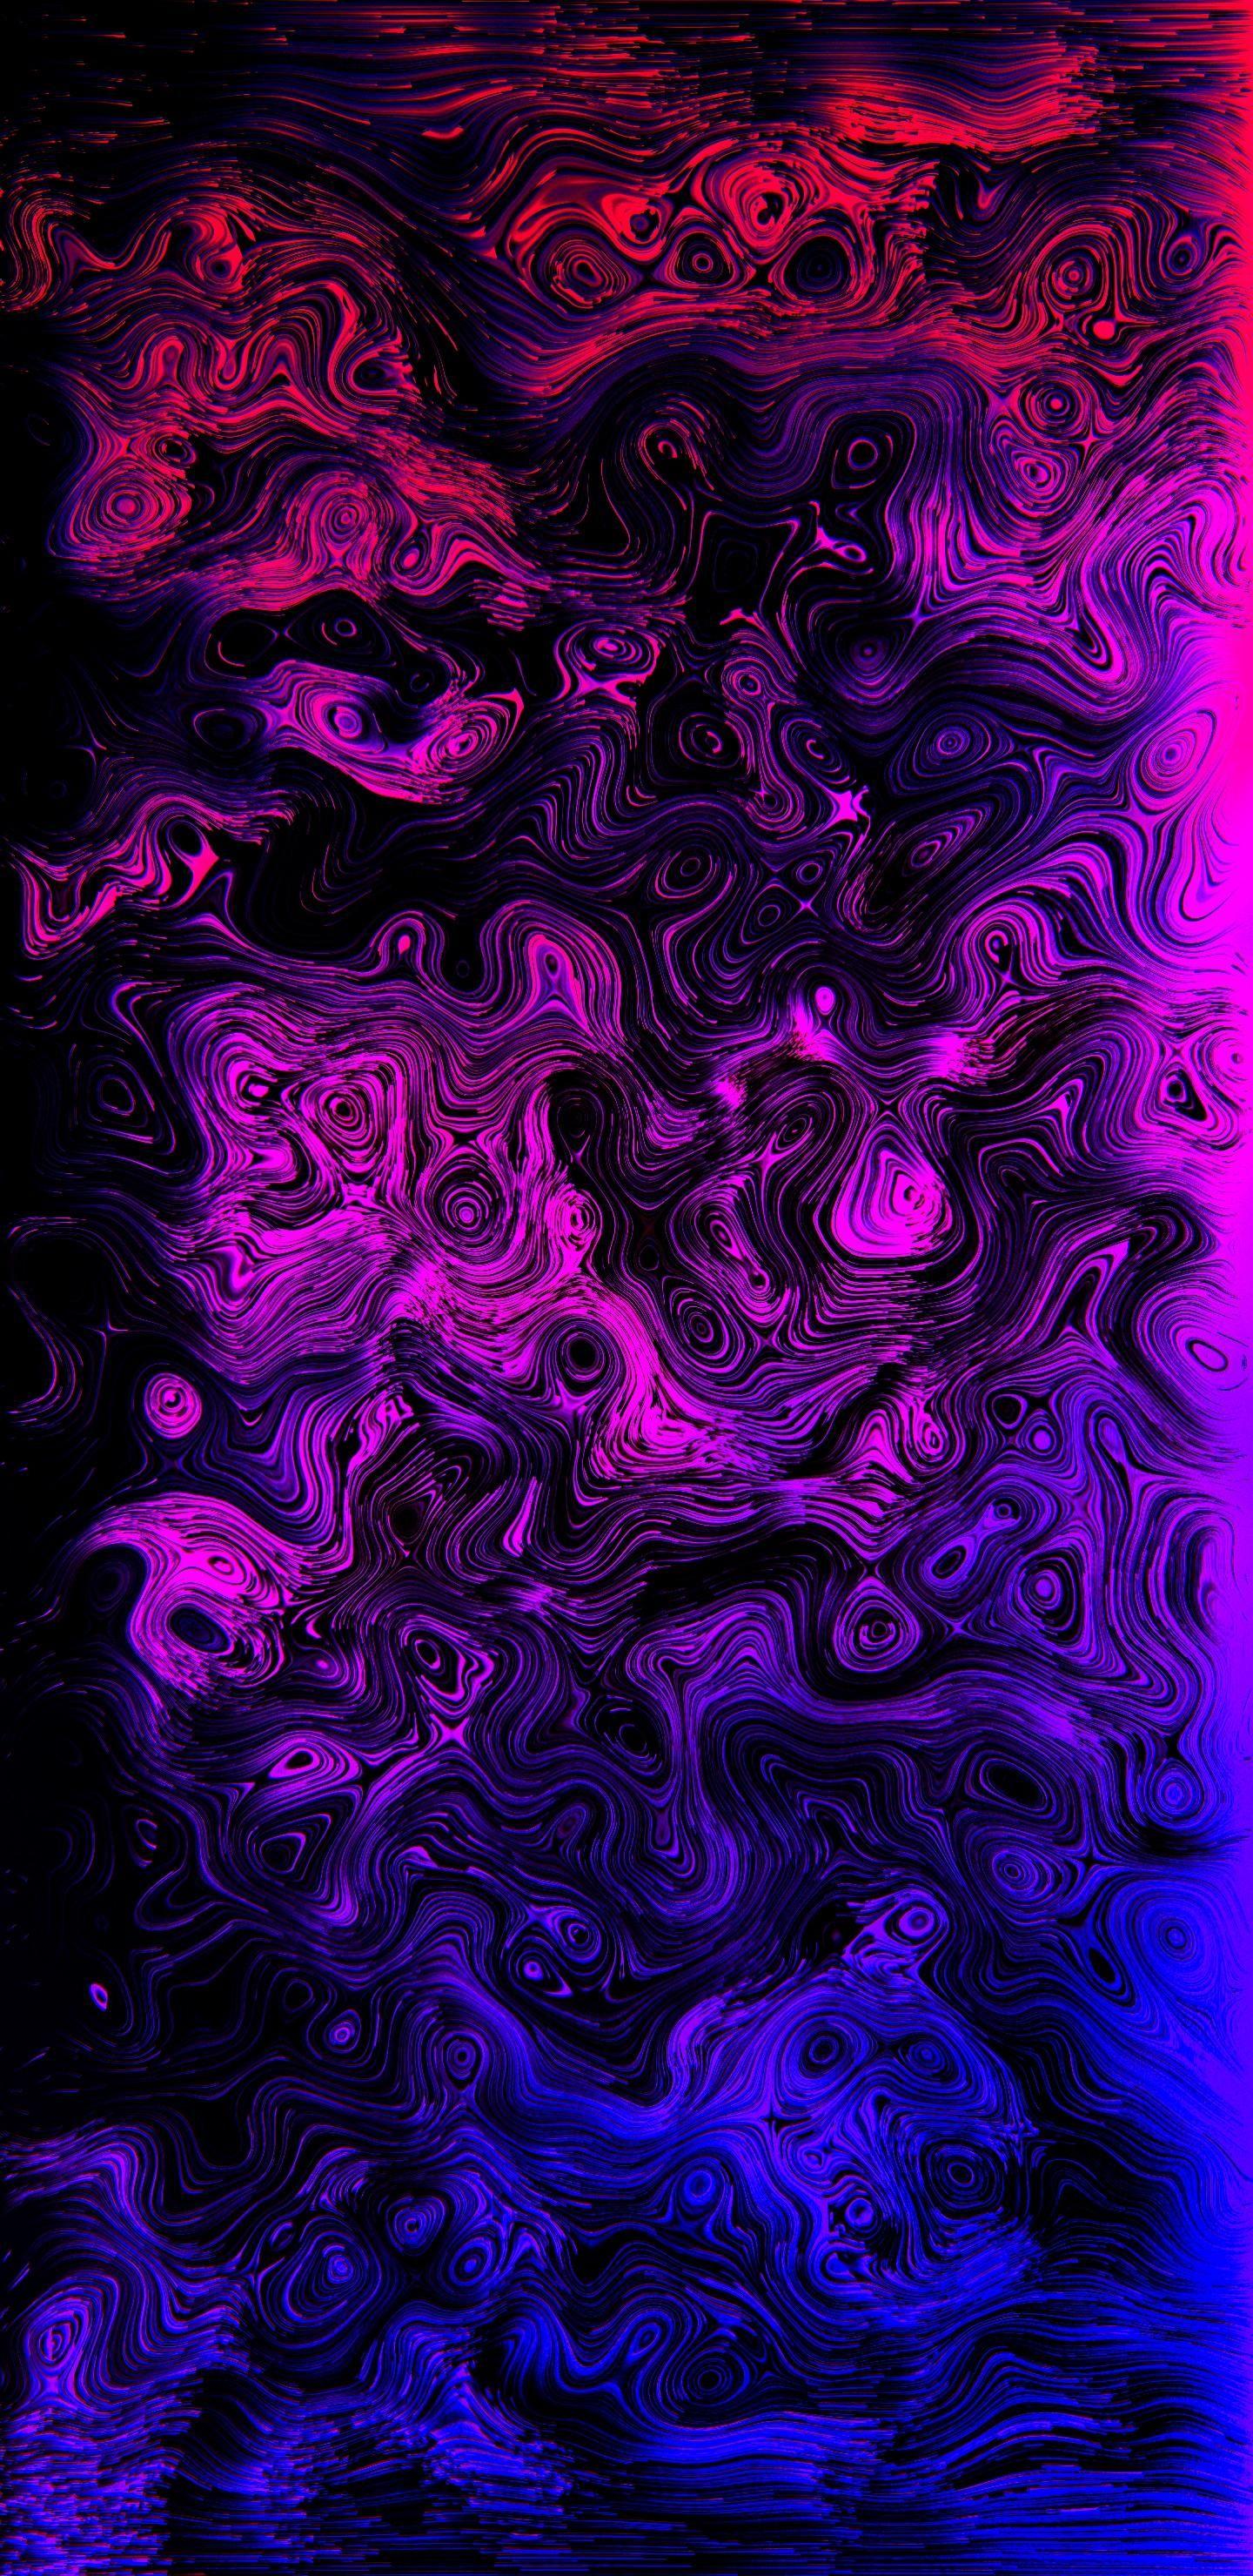 Great for OLED screens [1440 x 2960]